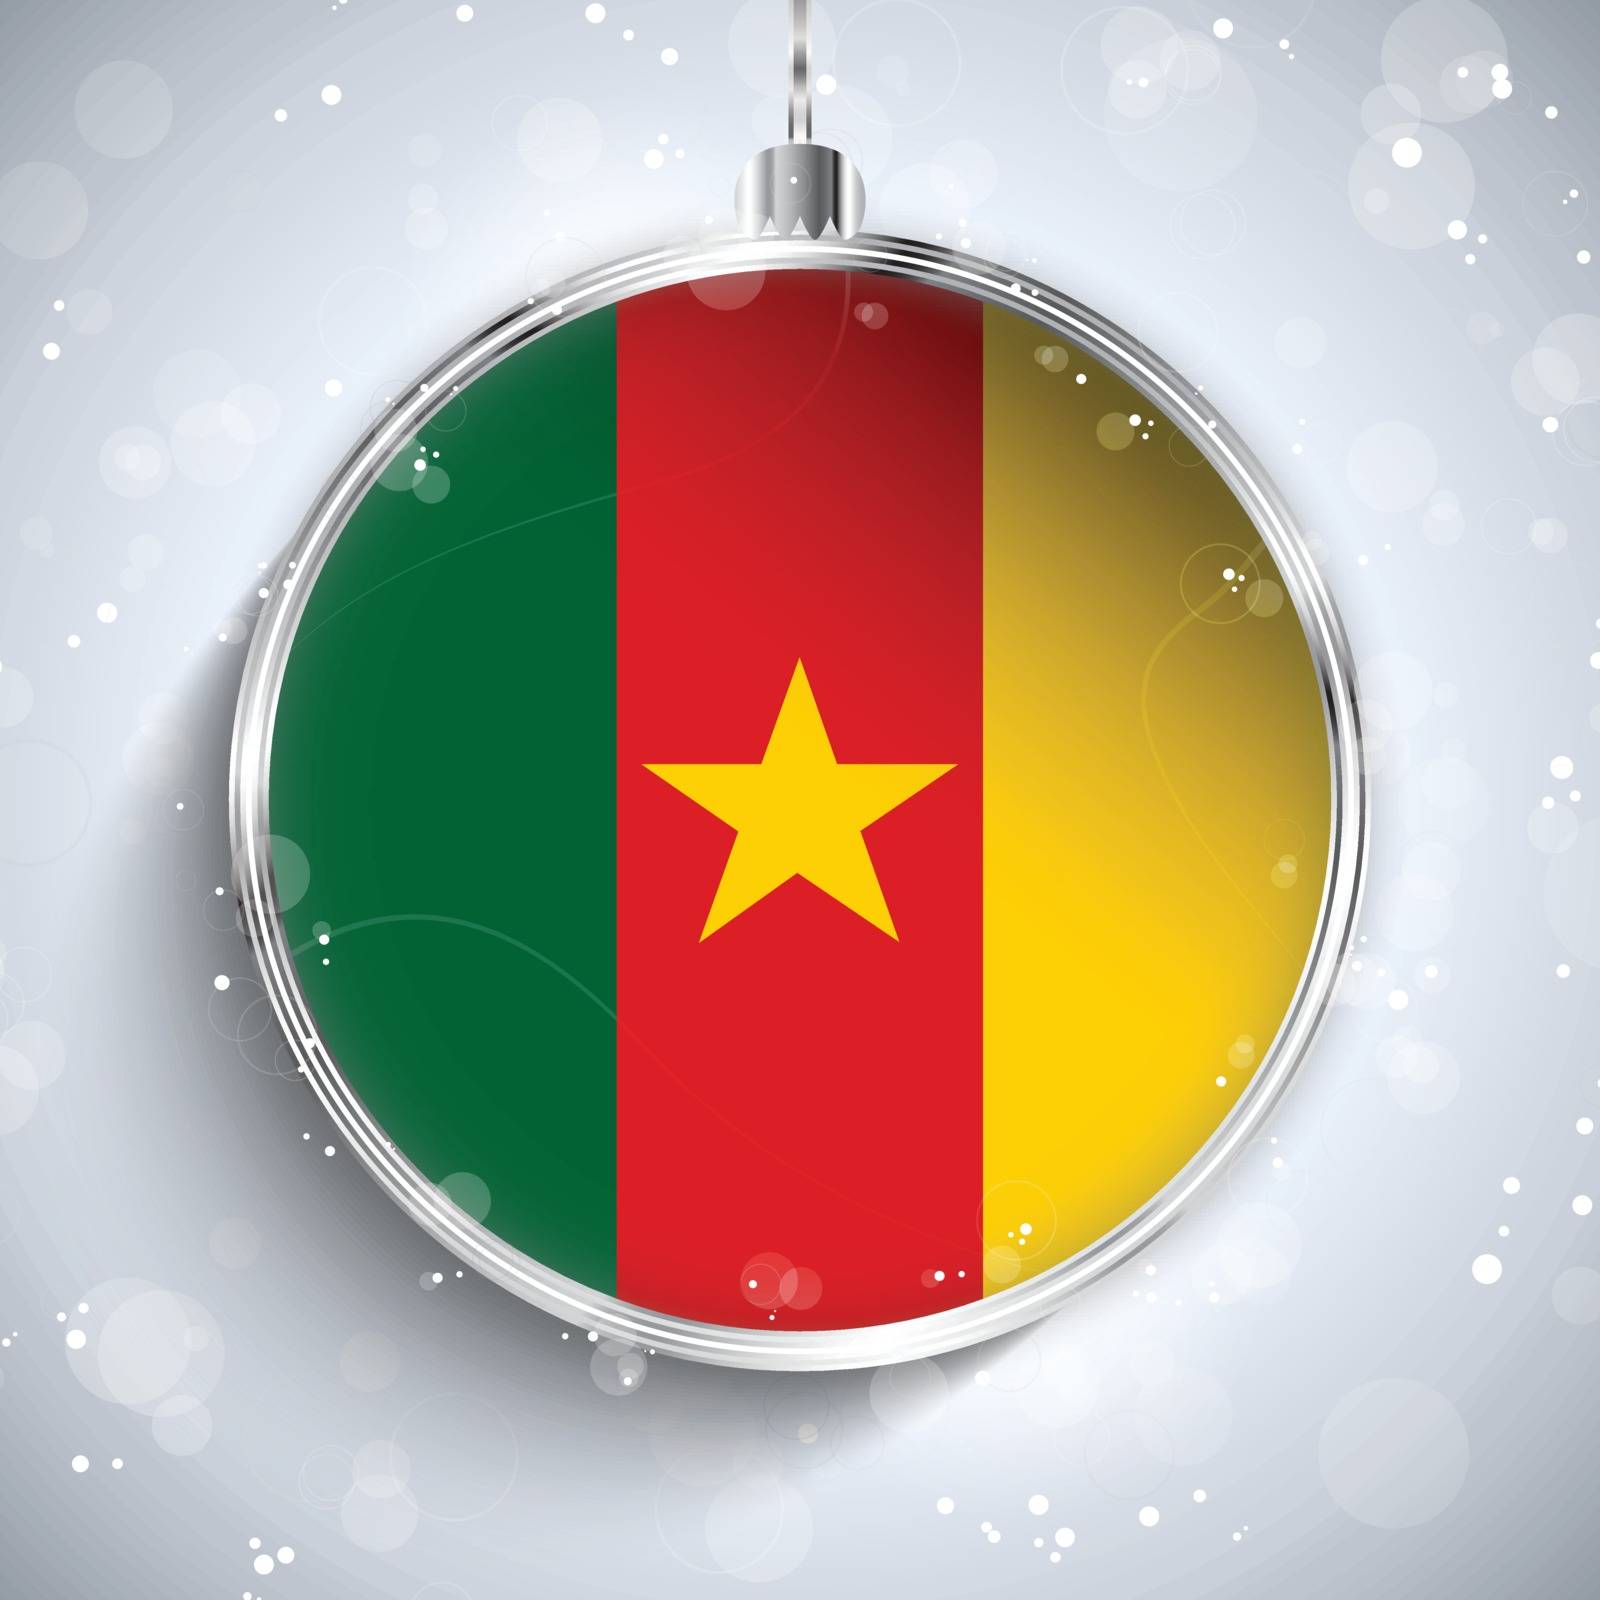 Merry Christmas Silver Ball with Flag Cameroon by gubh83